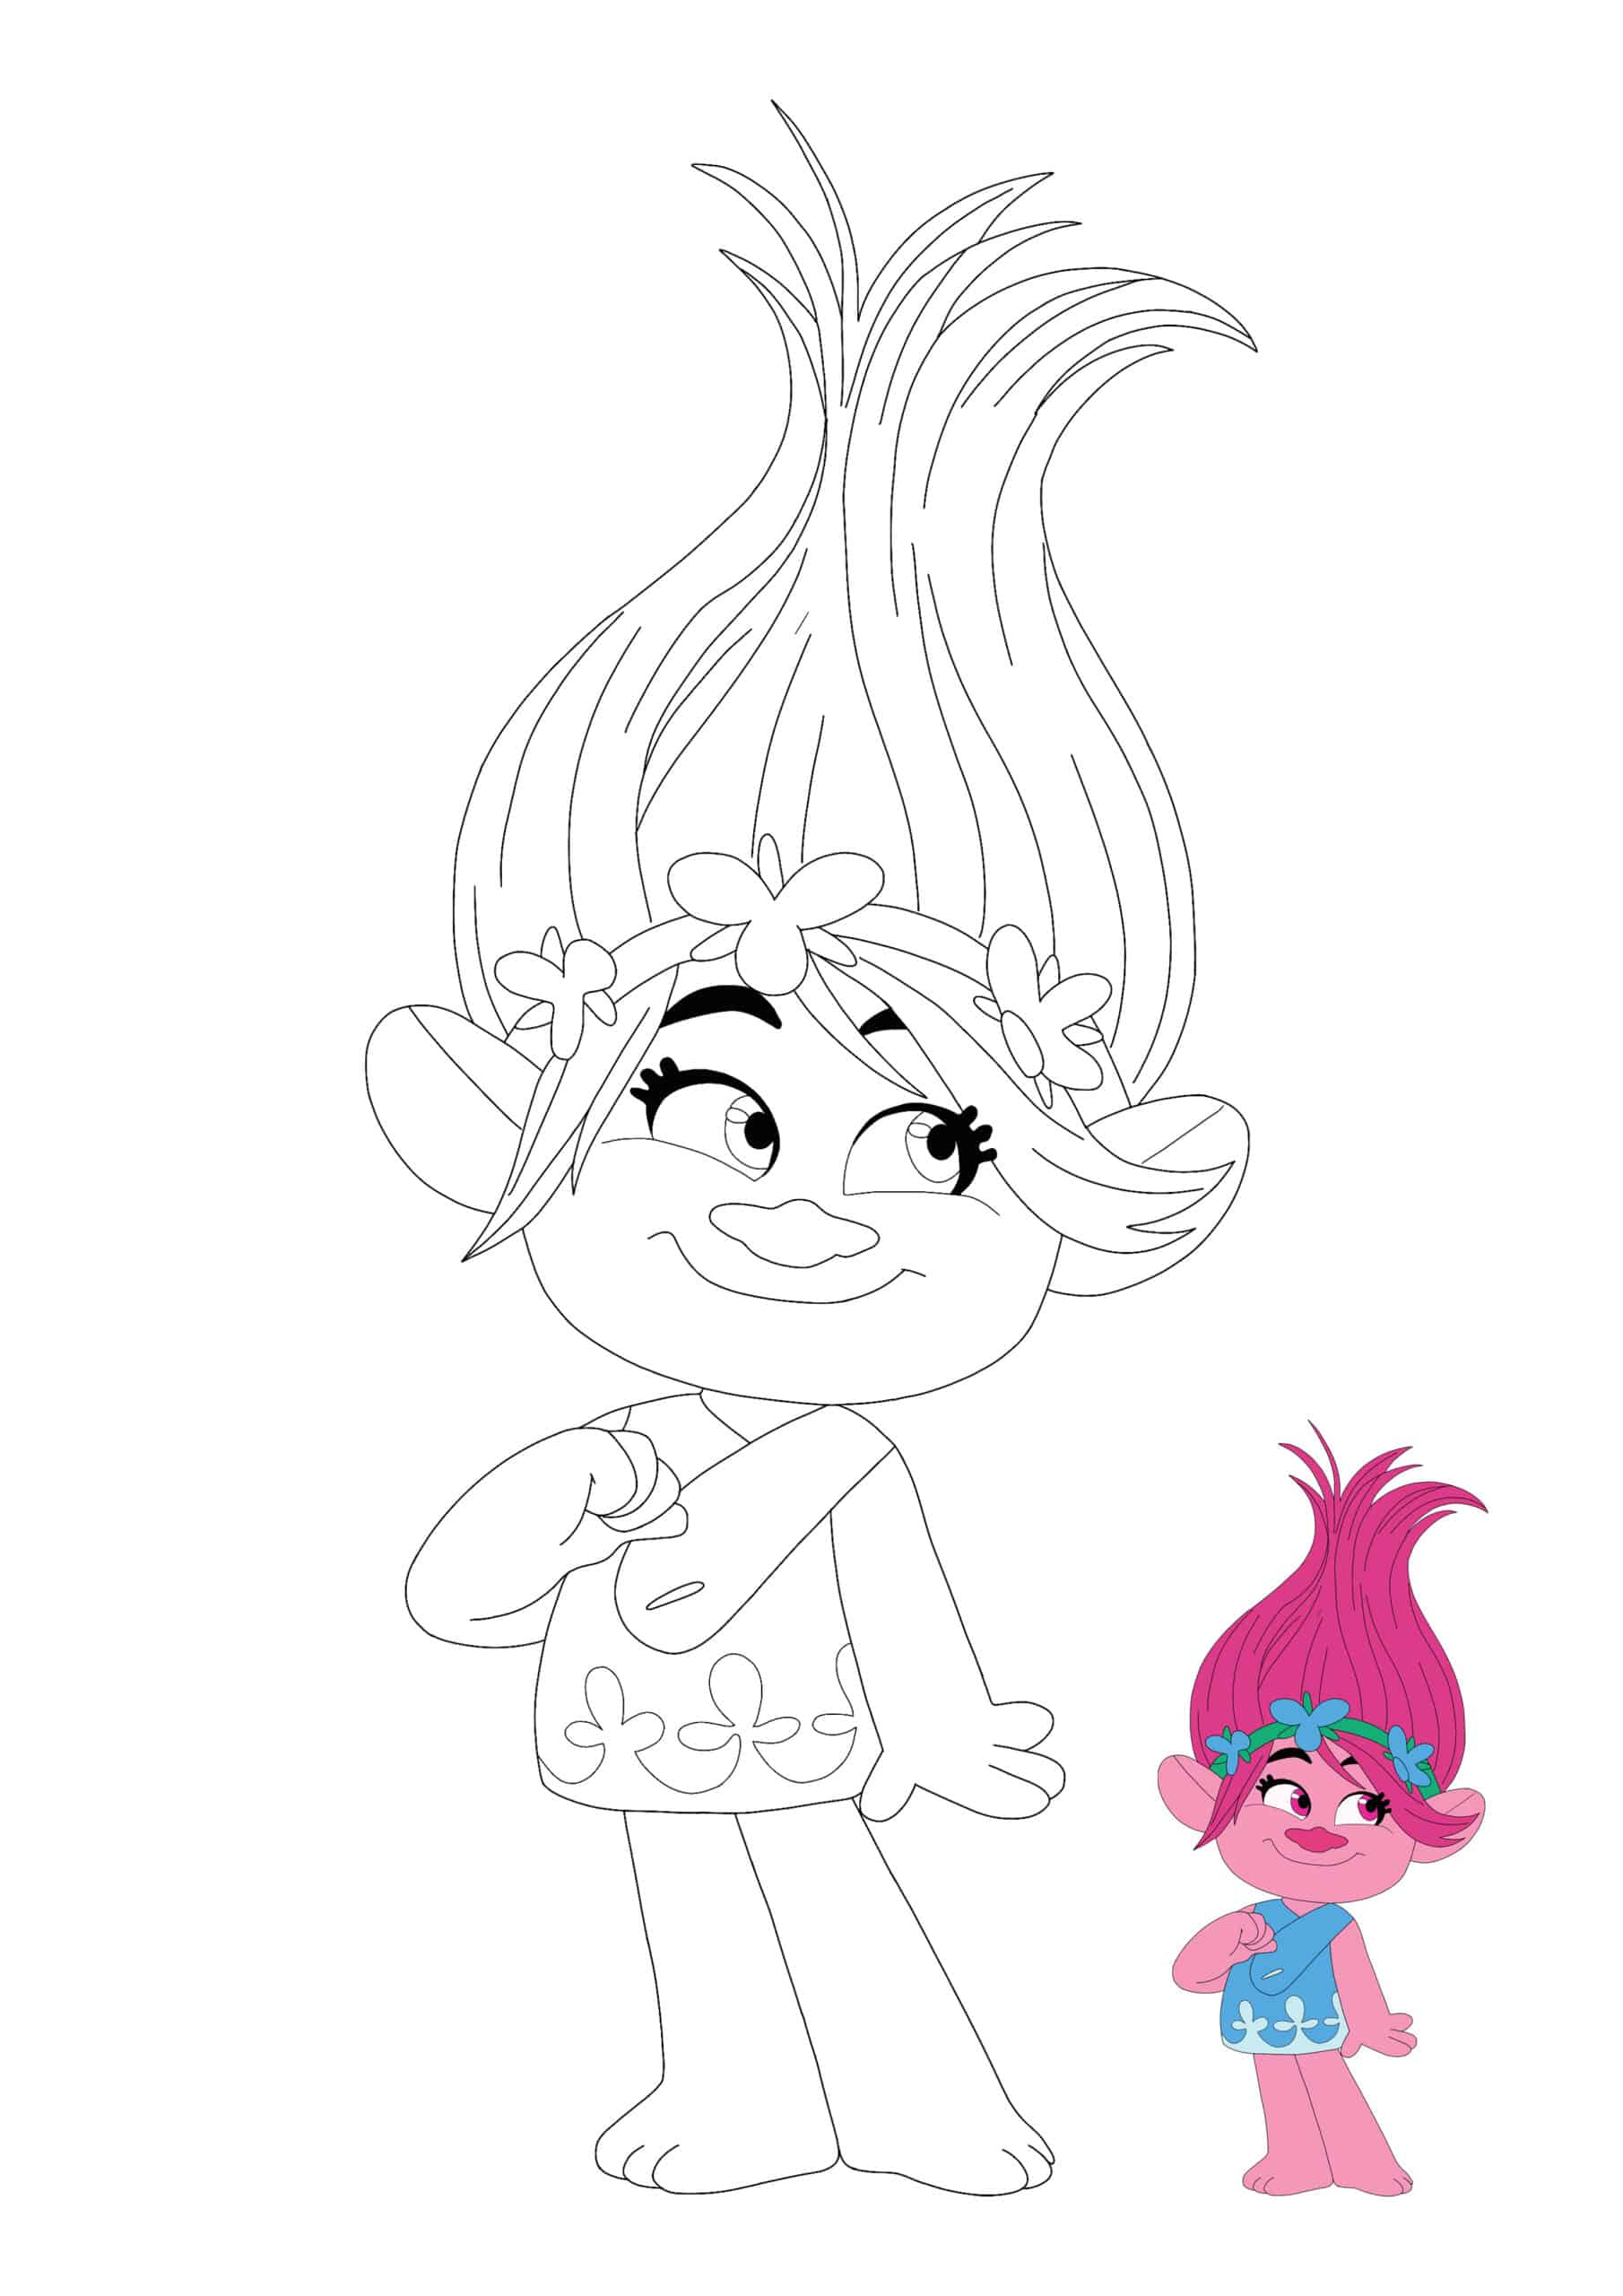 Princess Poppy From Trolls Coloring Page